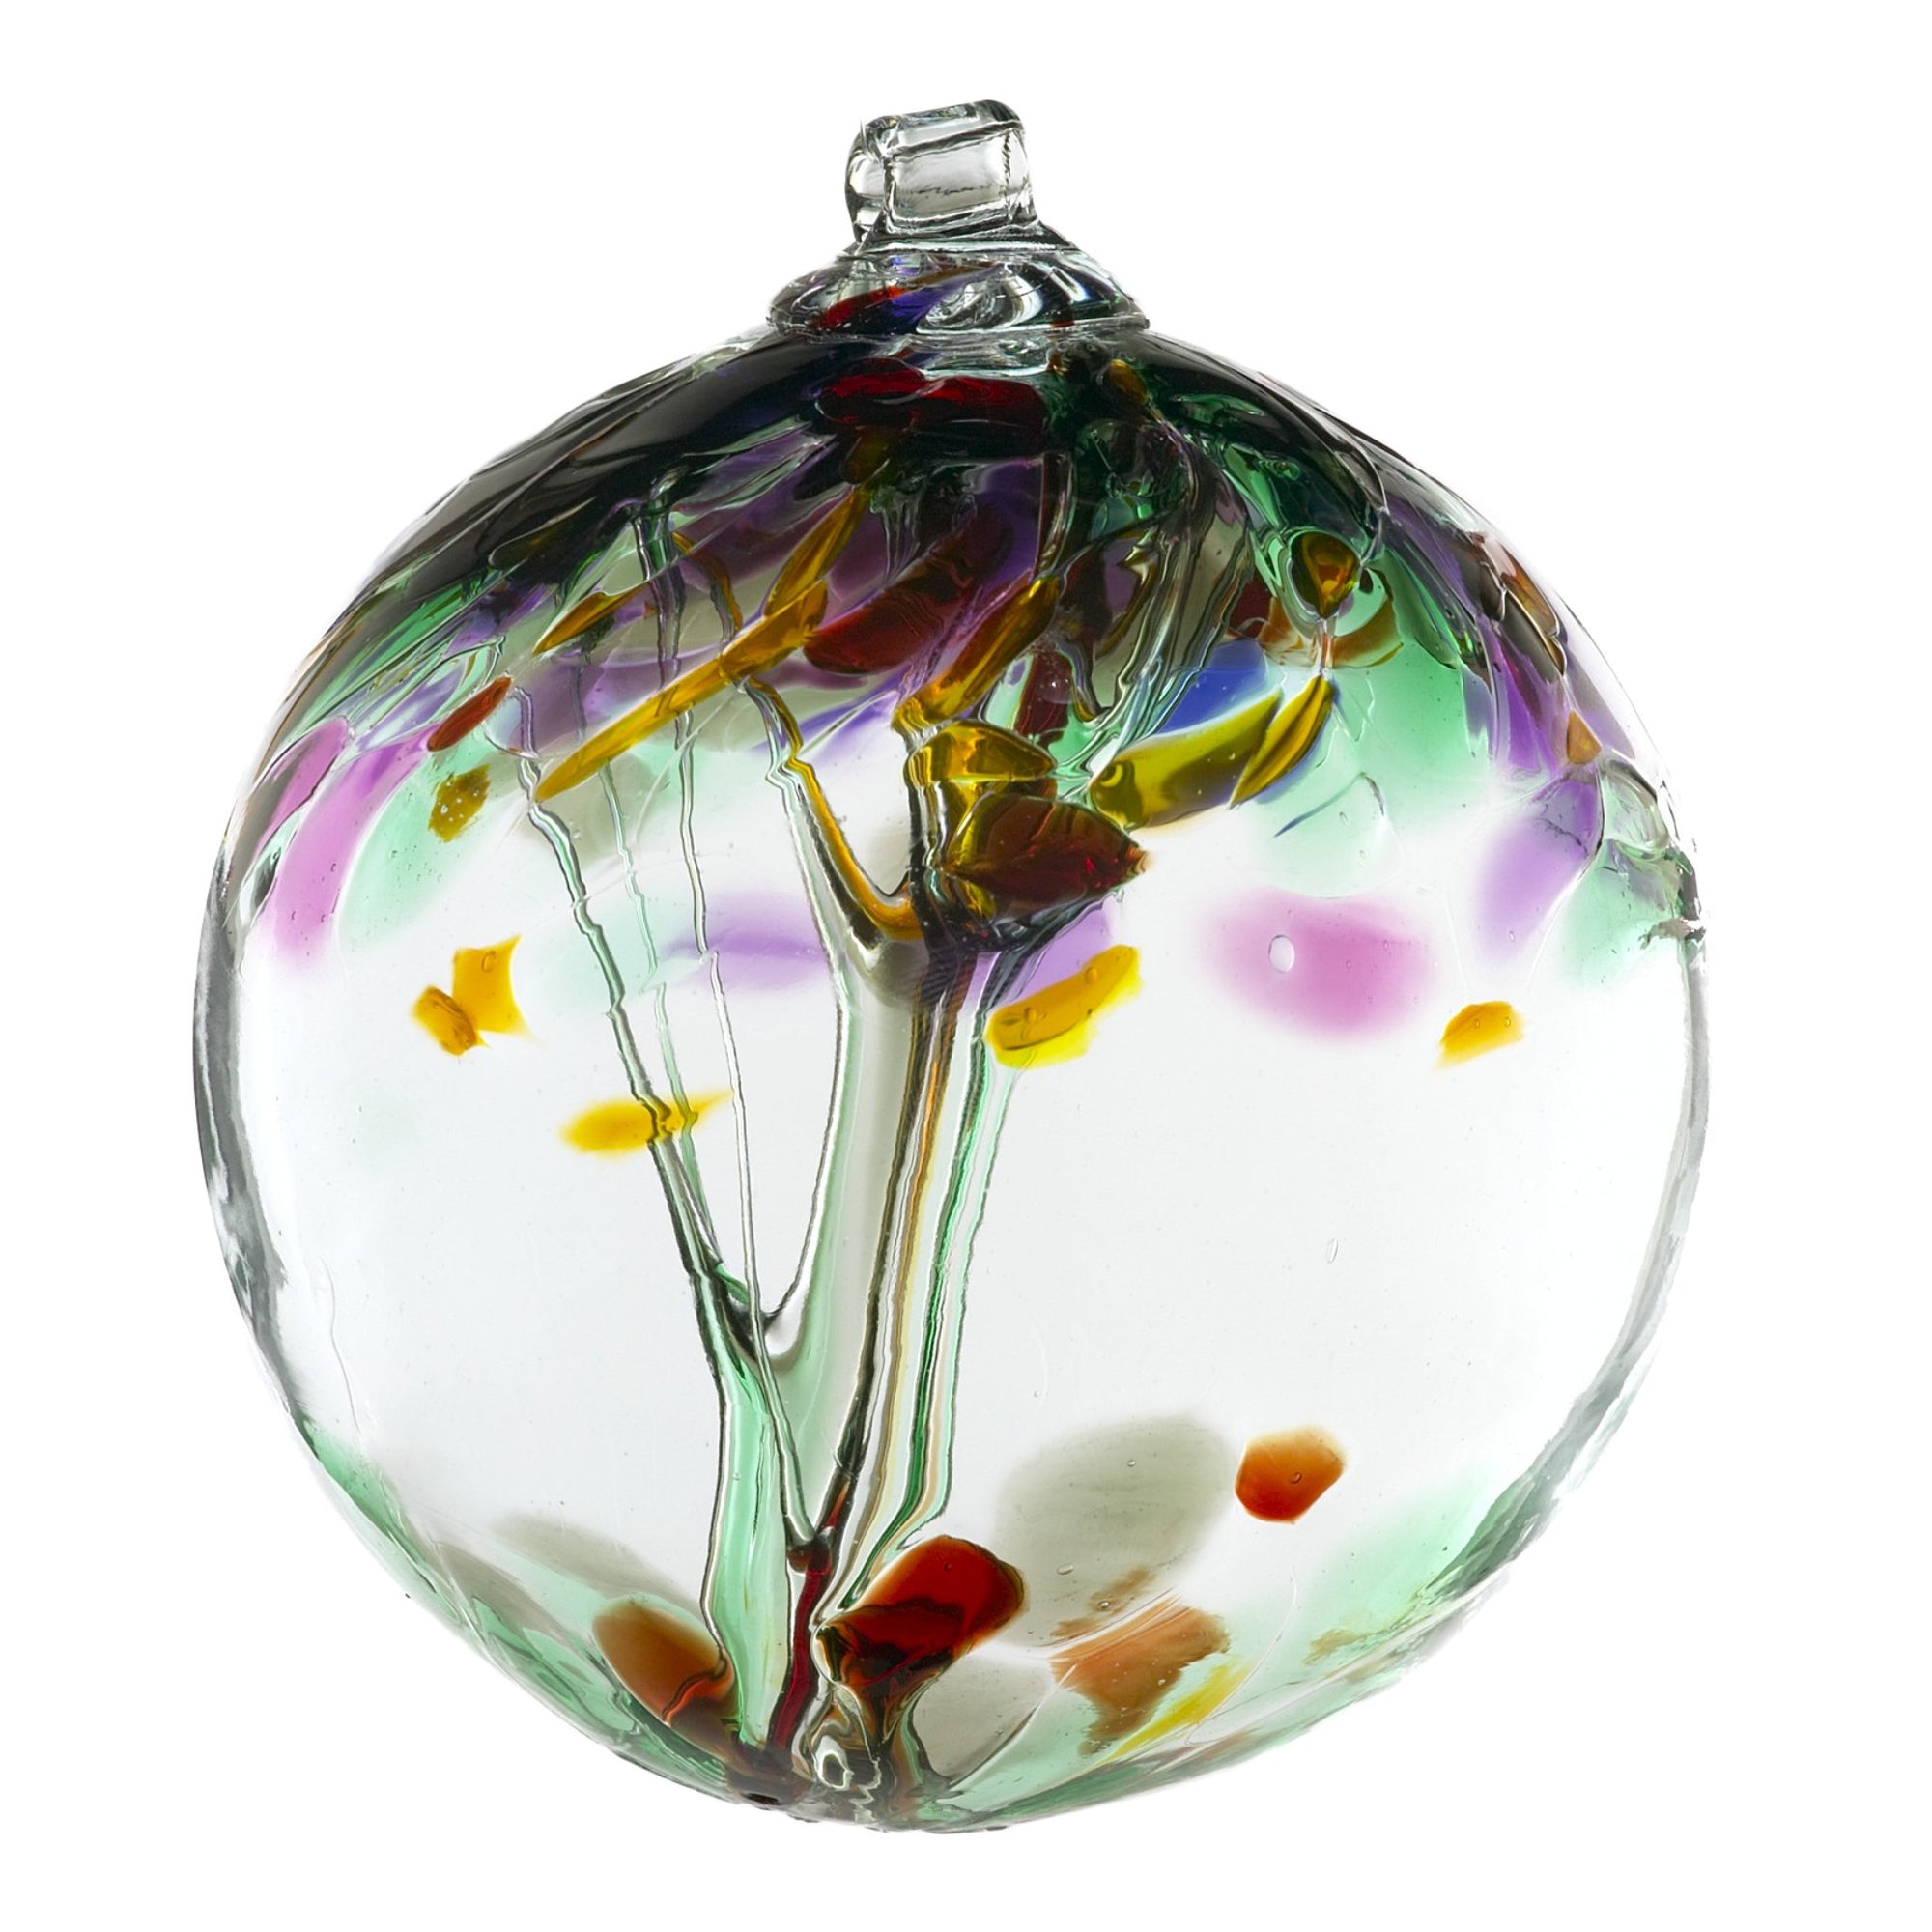 Hand-blown clear glass hanging ball ornament with  accent colors of  purple, yellow and green.